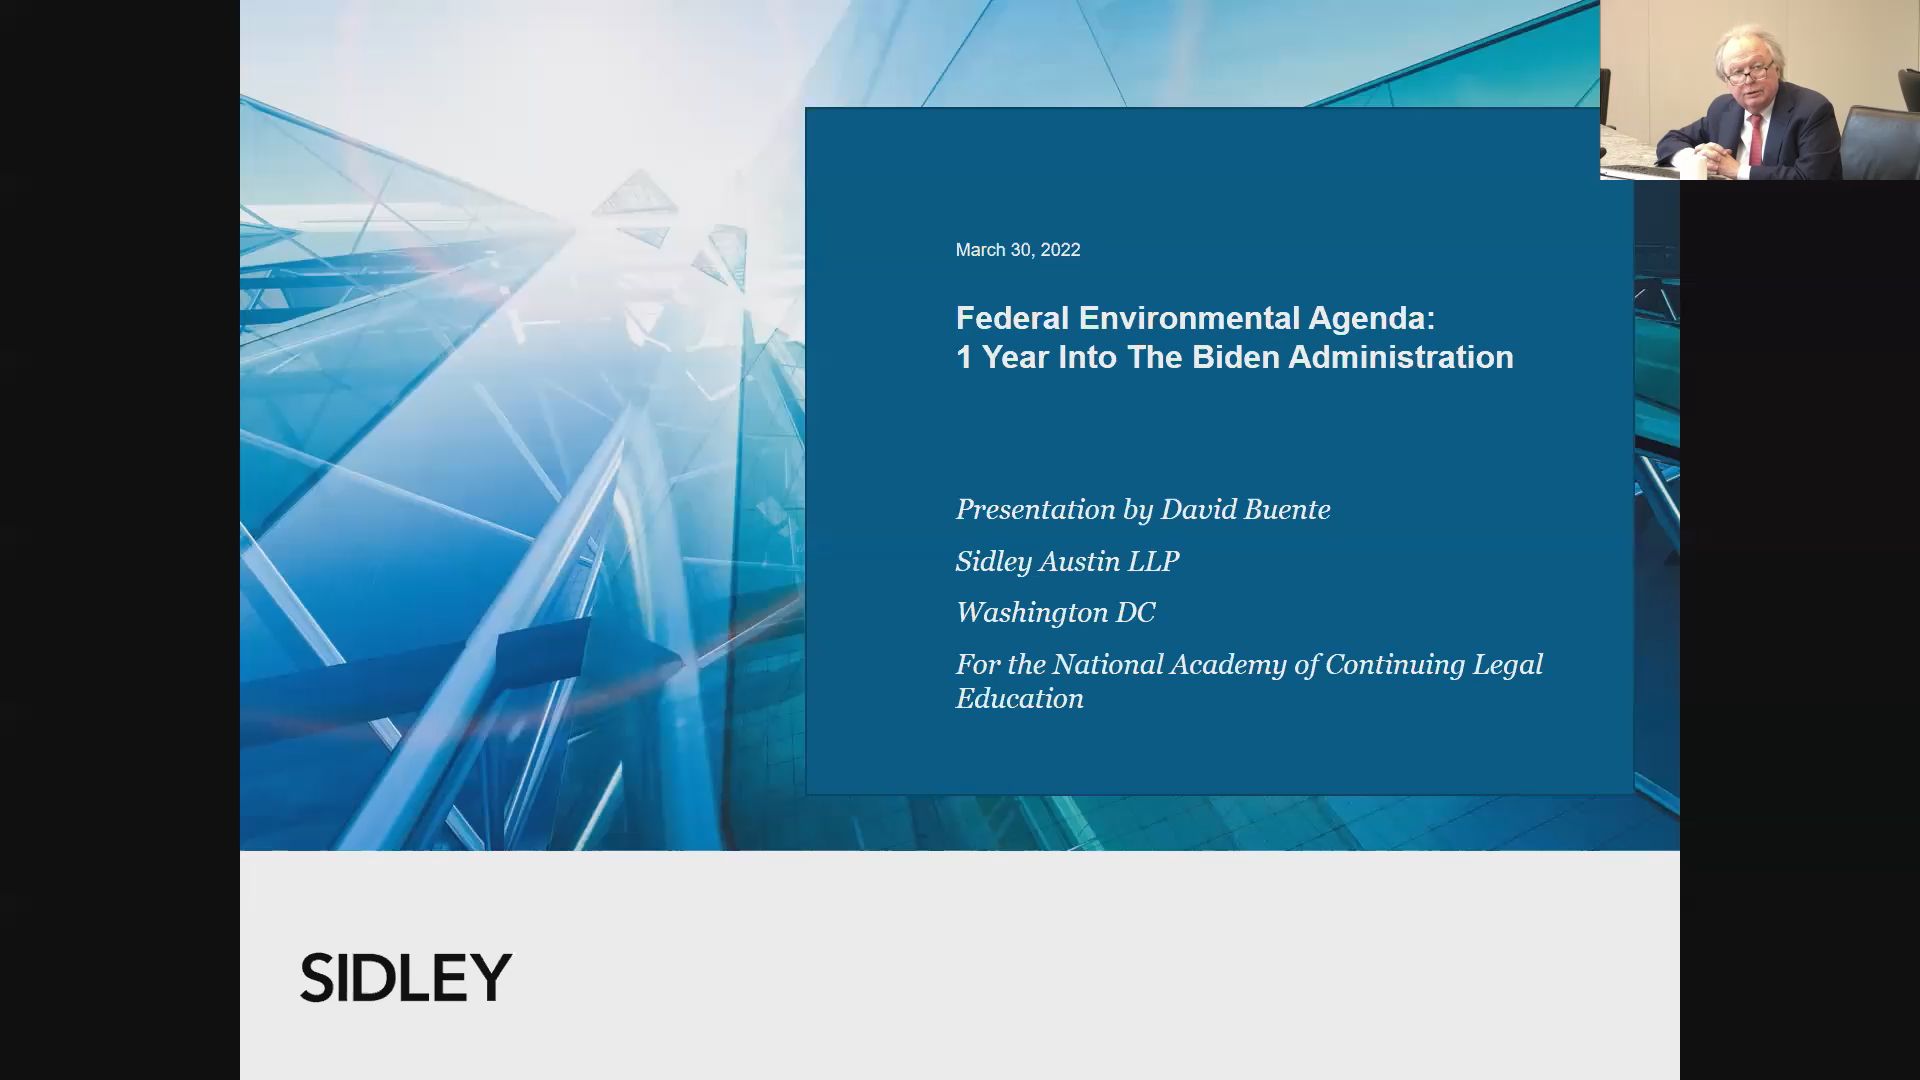 The Federal and Environmental Agenda: 1 Year Into The Biden Administration Thumbnail